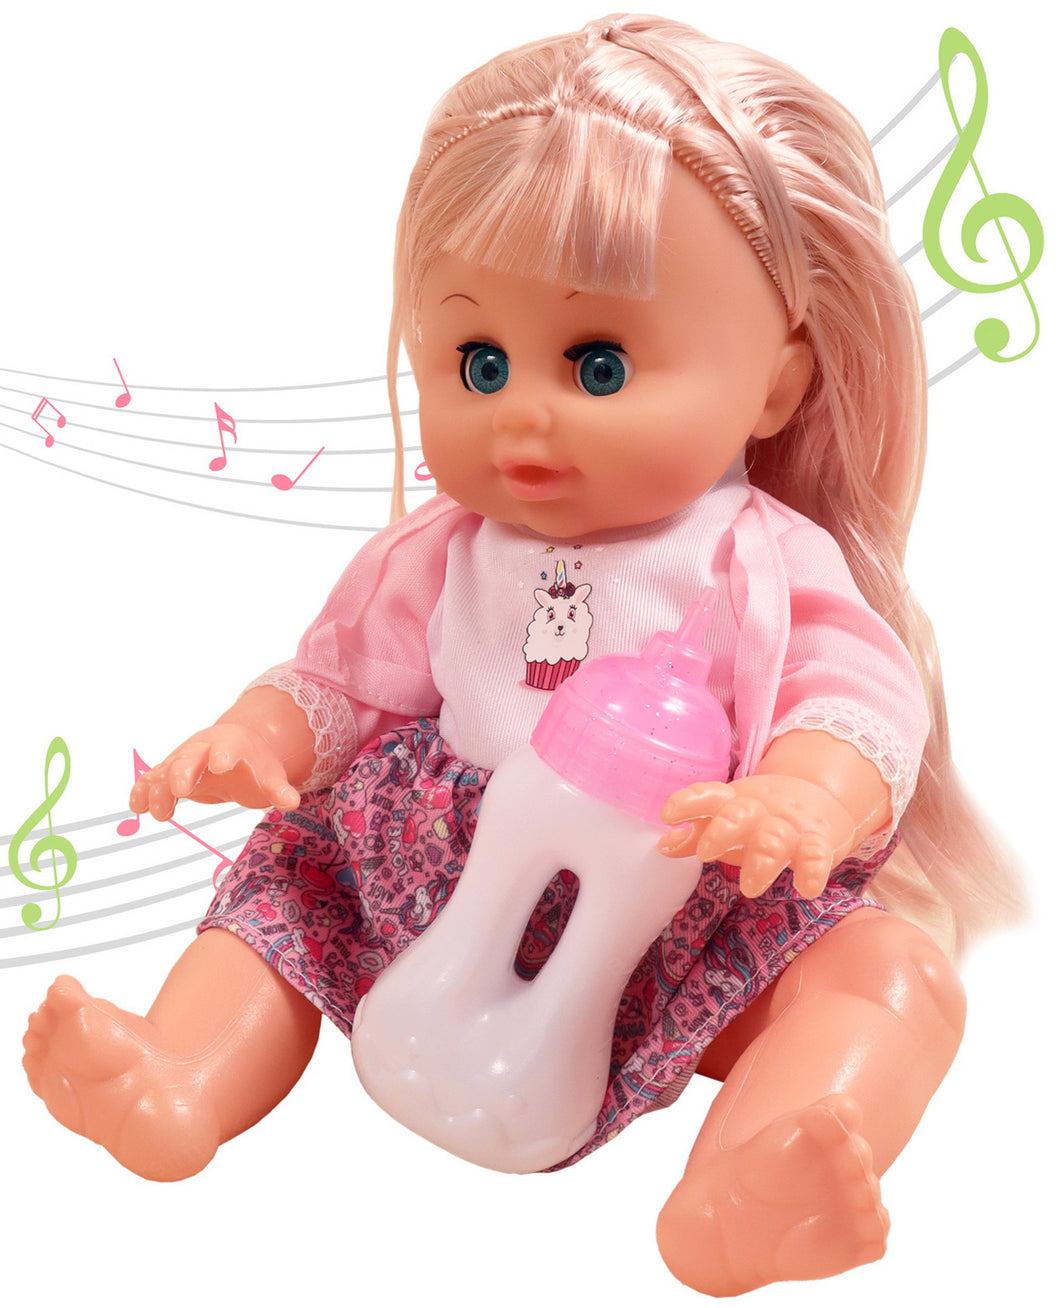 Toyshine 13 inches Musical Interactive Baby Doll Adorable and Realistic Look Baby Doll with Feeding Bottle for Ages 3 and up